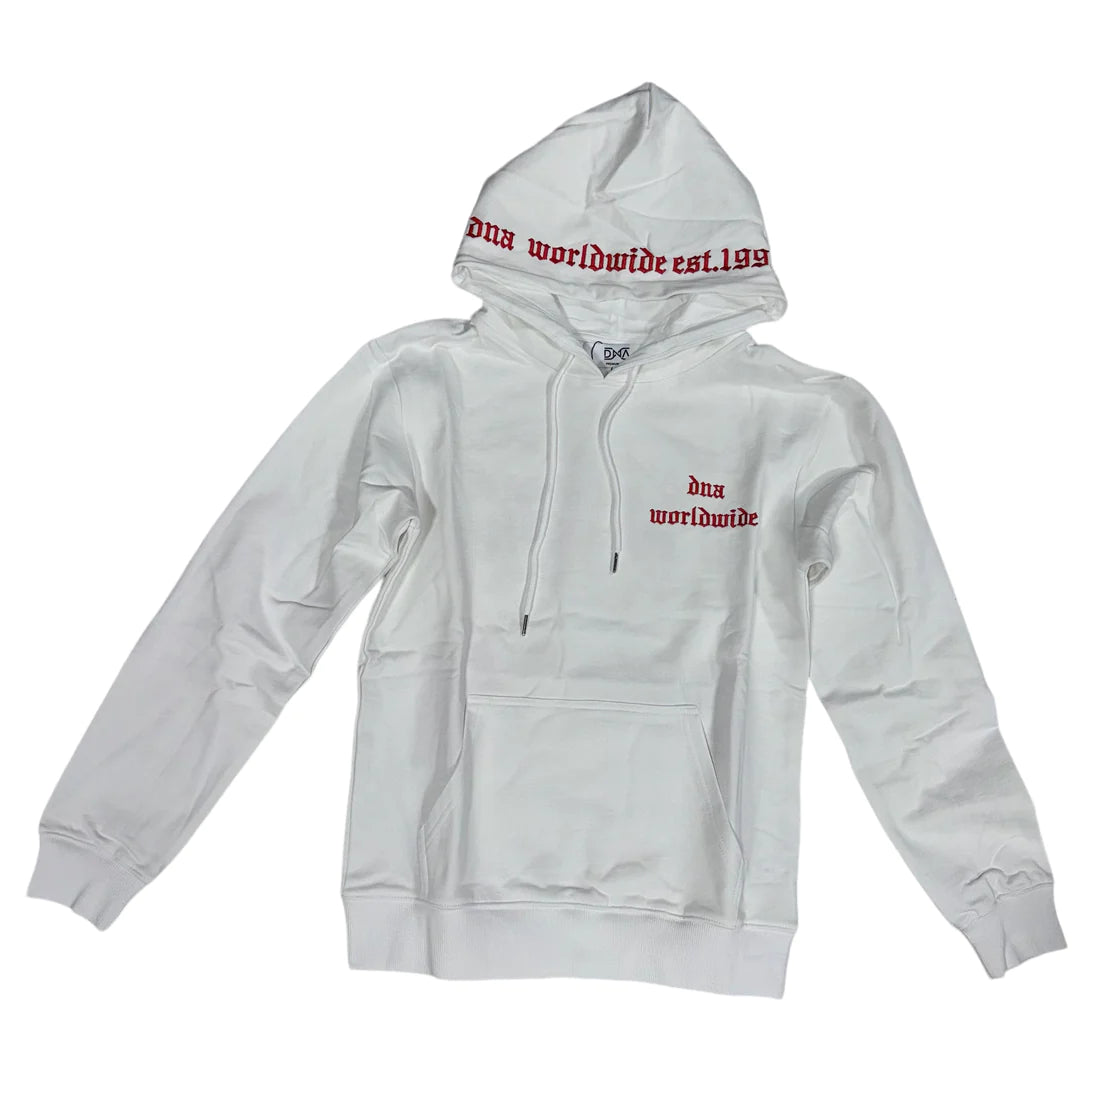 DNA Worldwide Map Hoodie - White/Red